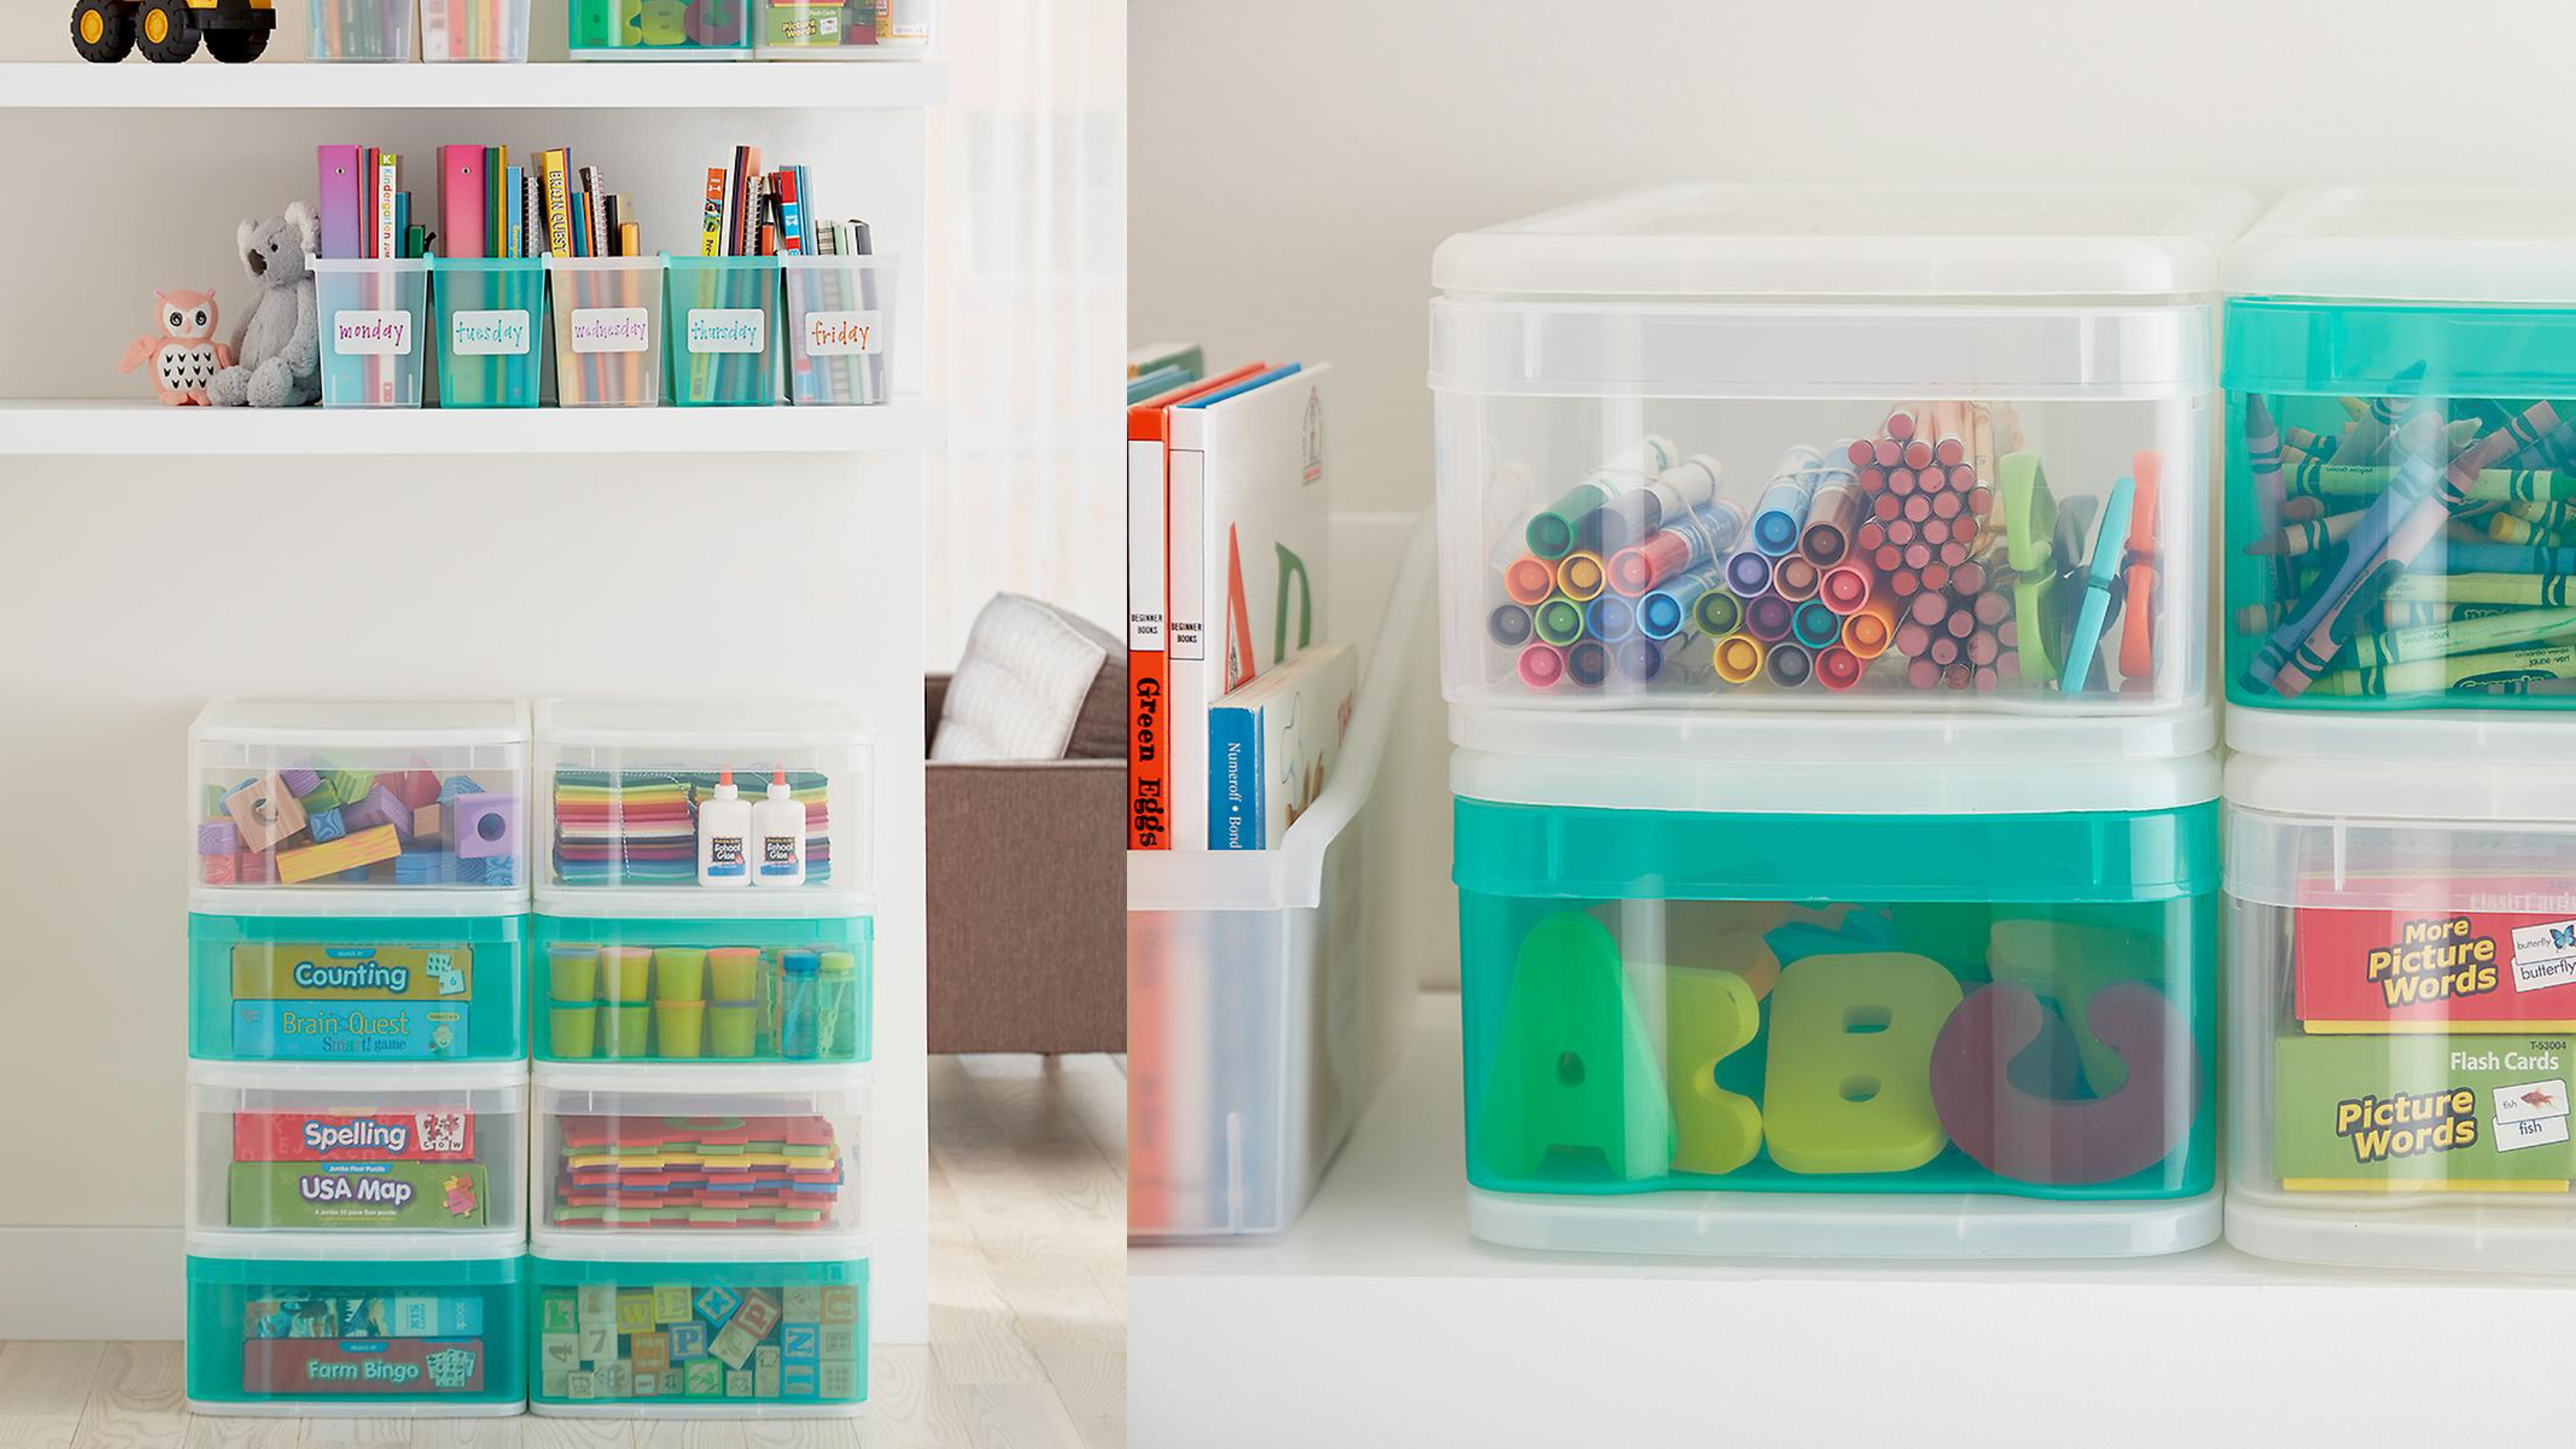 5 Genius Hidden Storage Solutions for a Small Space – Arts and Classy